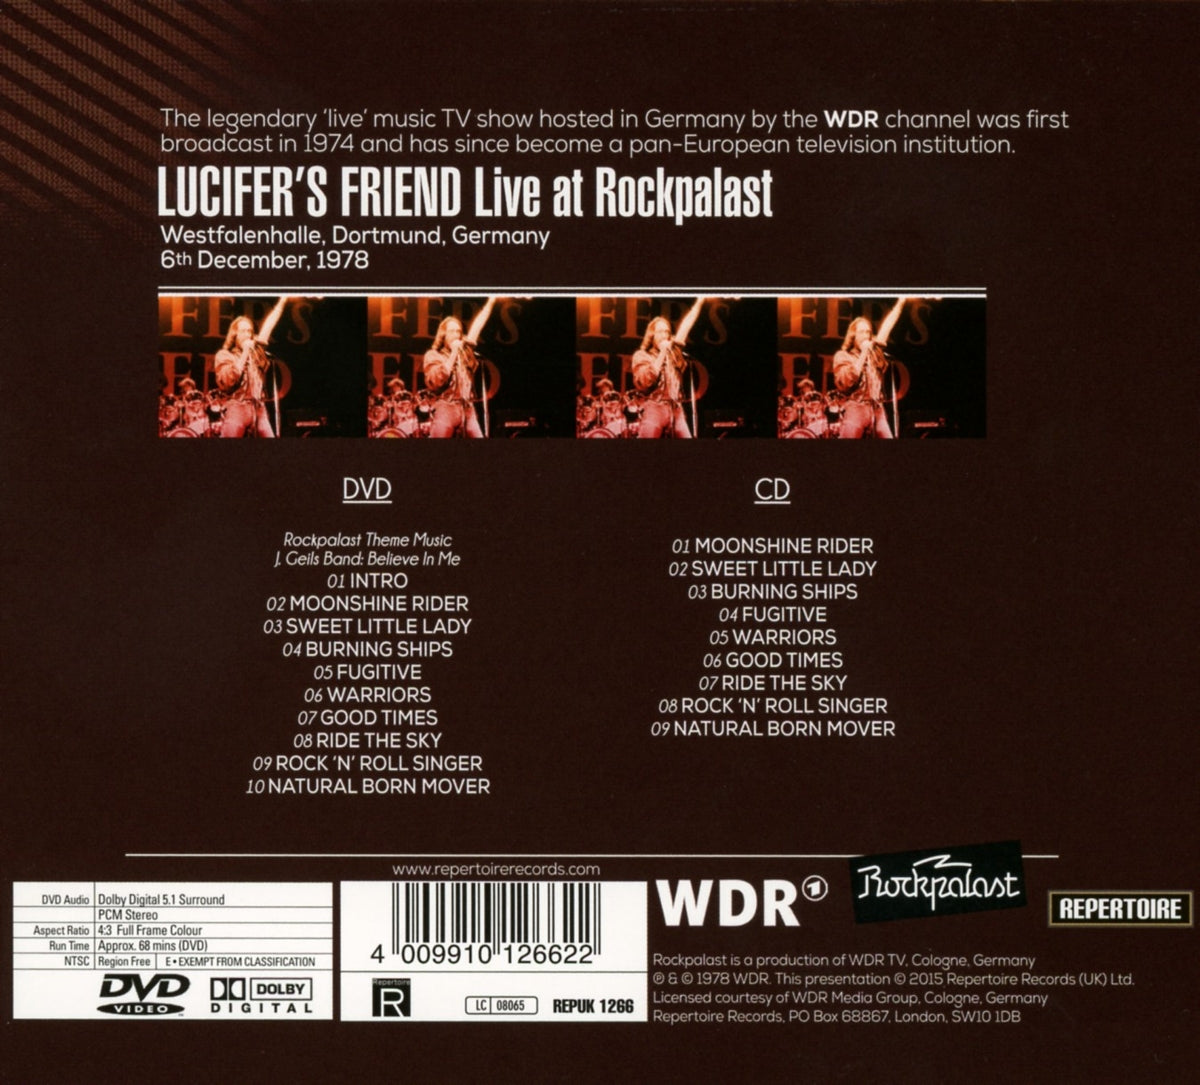 Lucifer's Friend - Live At Rockpalast (CD+DVD)